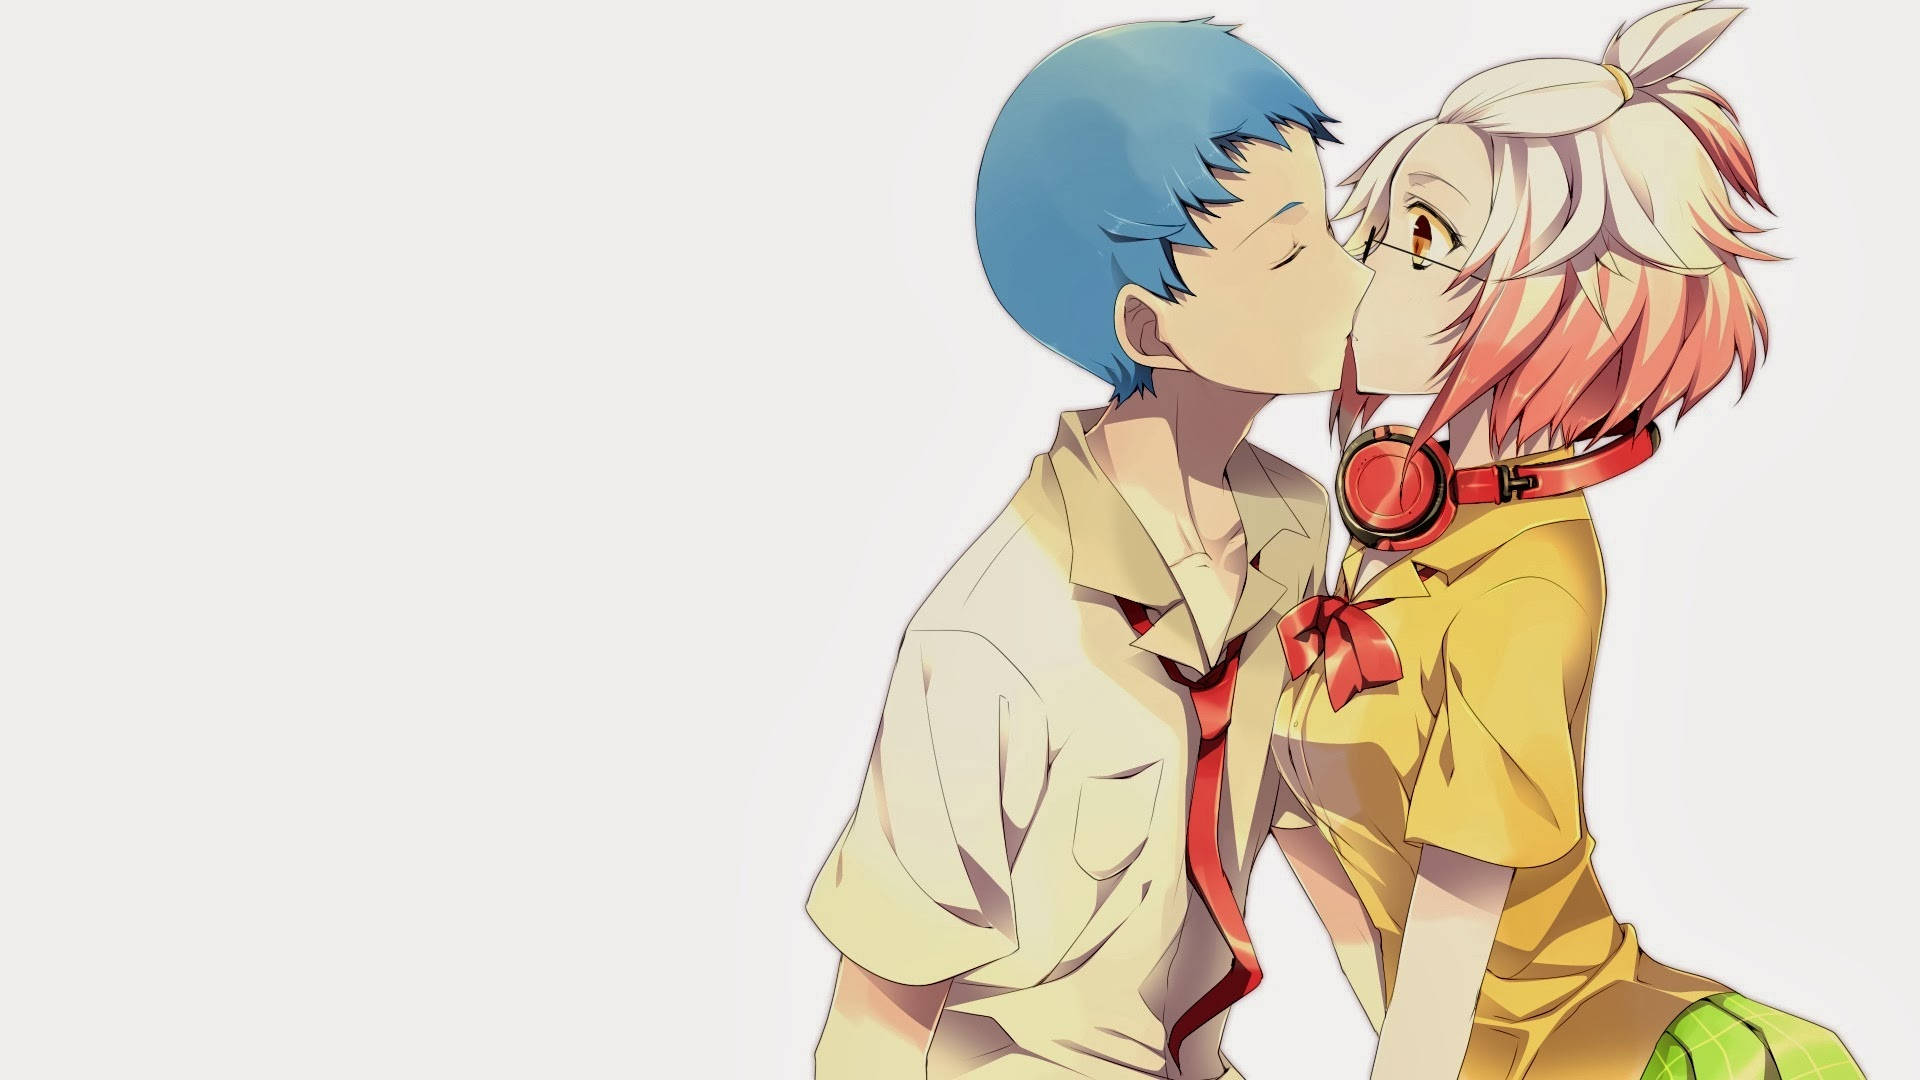 Anime Couple Kiss From Tales Of Graces Wallpaper